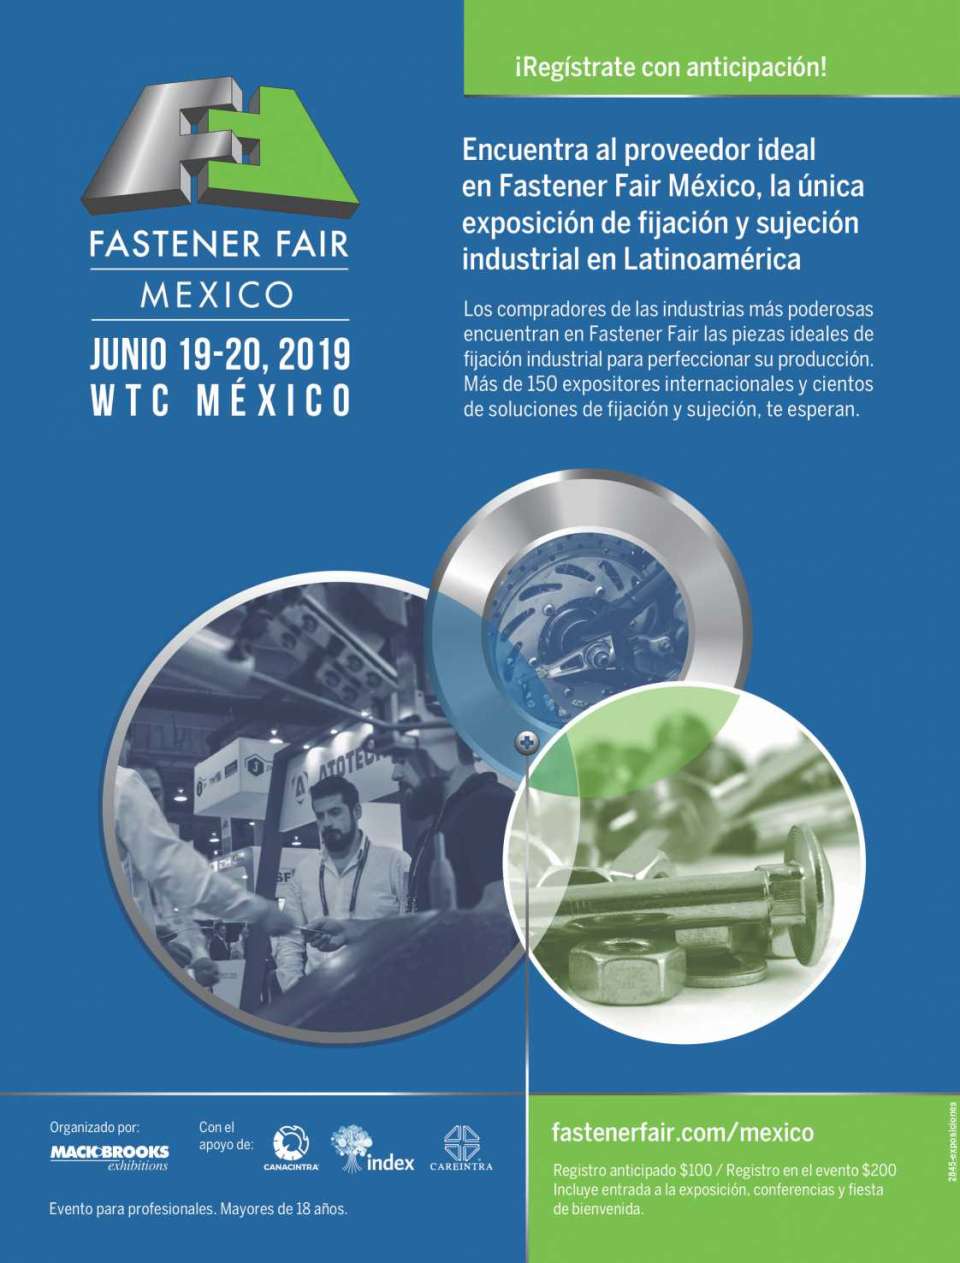 Find the ideal supplier in Fastener Fair Mexico, the only Exhibition of Fixation and Fixation in Latin America, from June 19 to 20, 2019 in WTC MEXICO